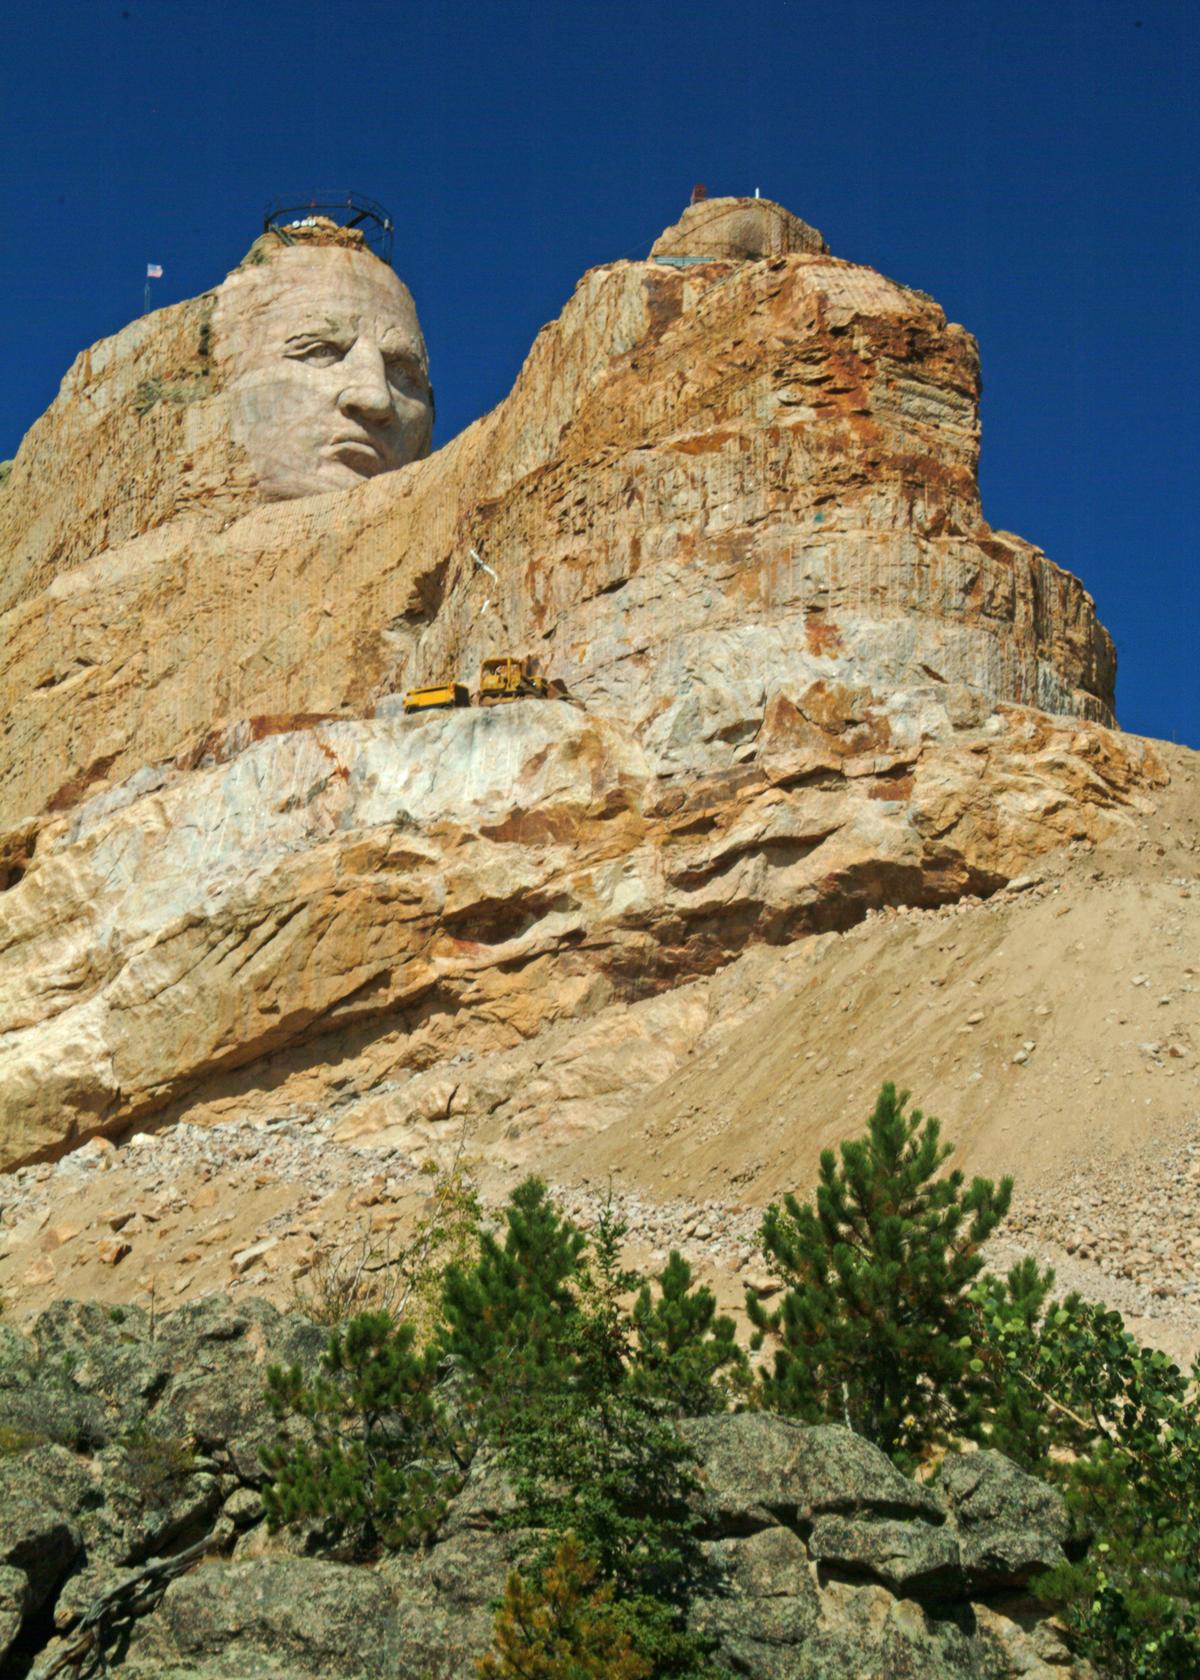 Work on the Crazy Horse Memorial officially began in 1948, and no one is predicting when it will be completed. Those in charge of the project say that all depends on weather and the availability of funds. It is entirely financed through visitor fees and private donations. (Fred J. Eckert)